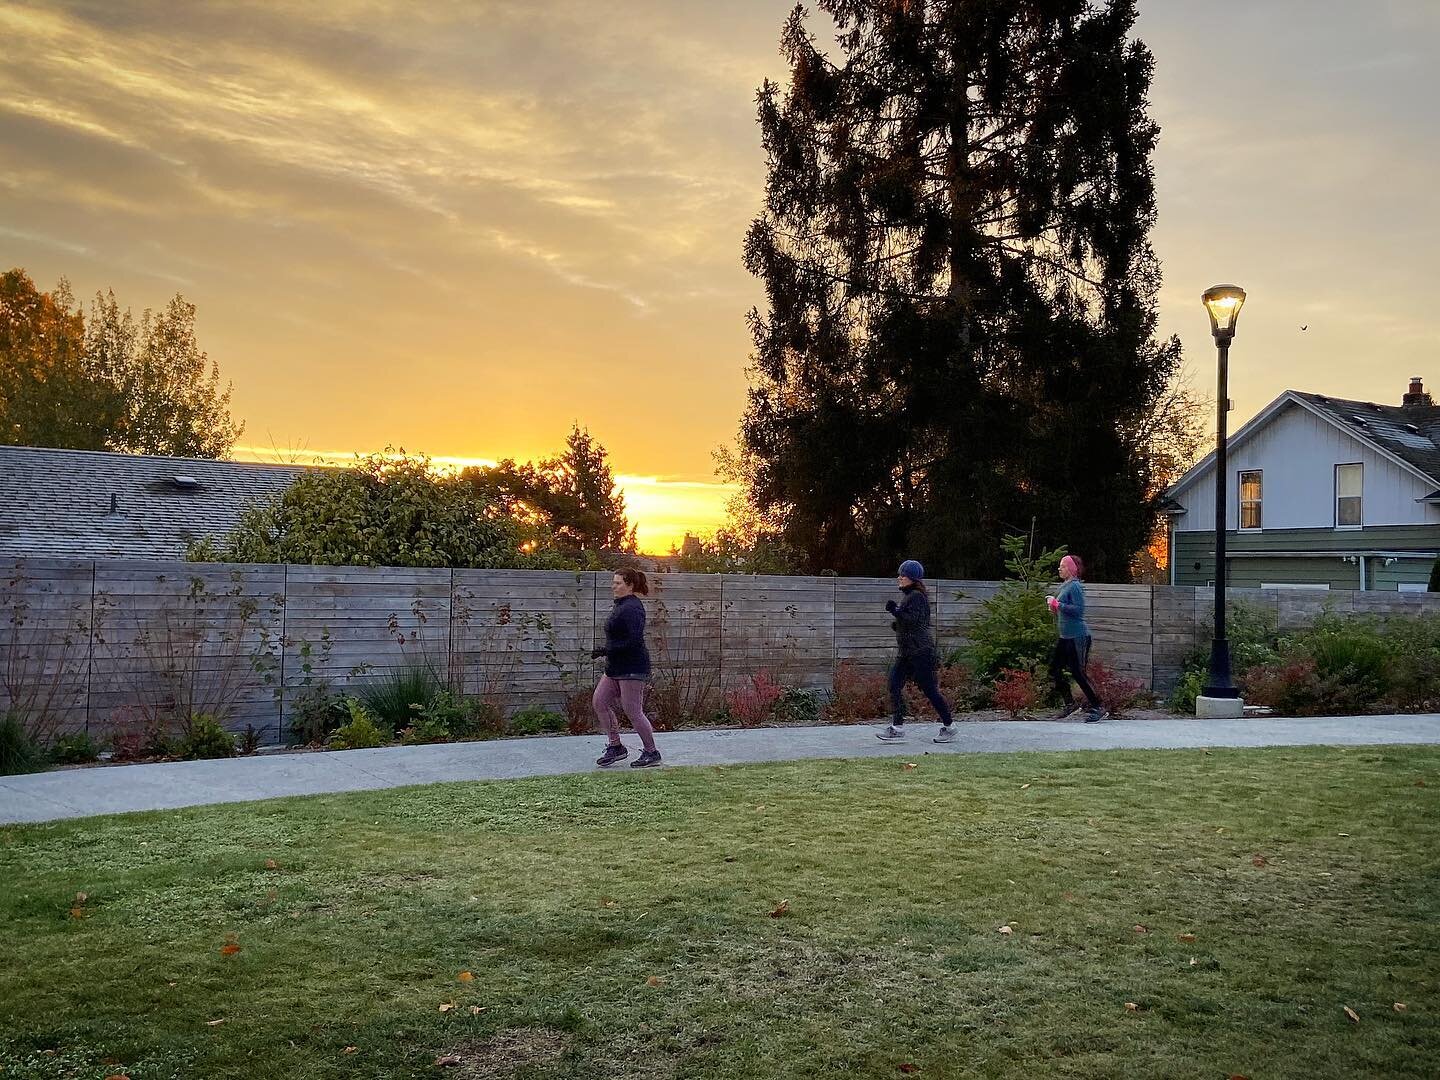 Did your morning look like this? It could have!!! #phinneyridge #bootcamp #outdoorfitness #moveyourbody